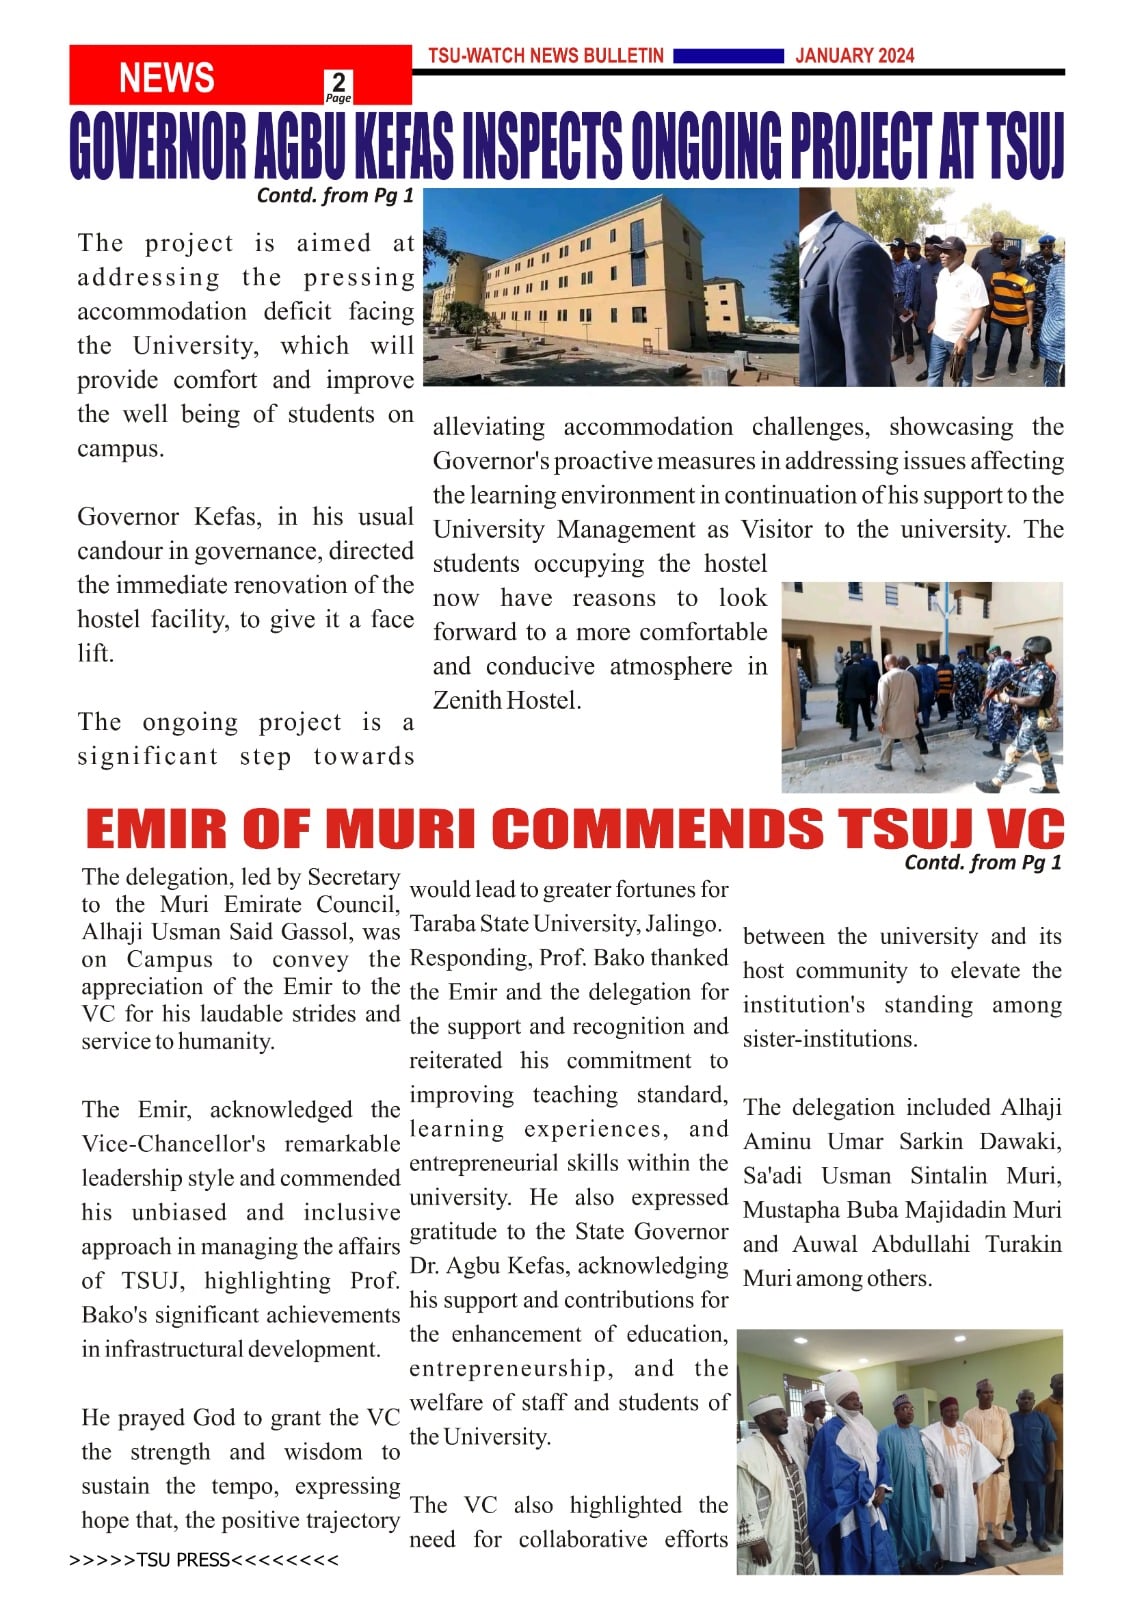 GOVERNOR AGBU KEFAS INSPECTS ONGOING PROJECT AT TSU/EMIR OF MURI COMMENDS TSUJ VC